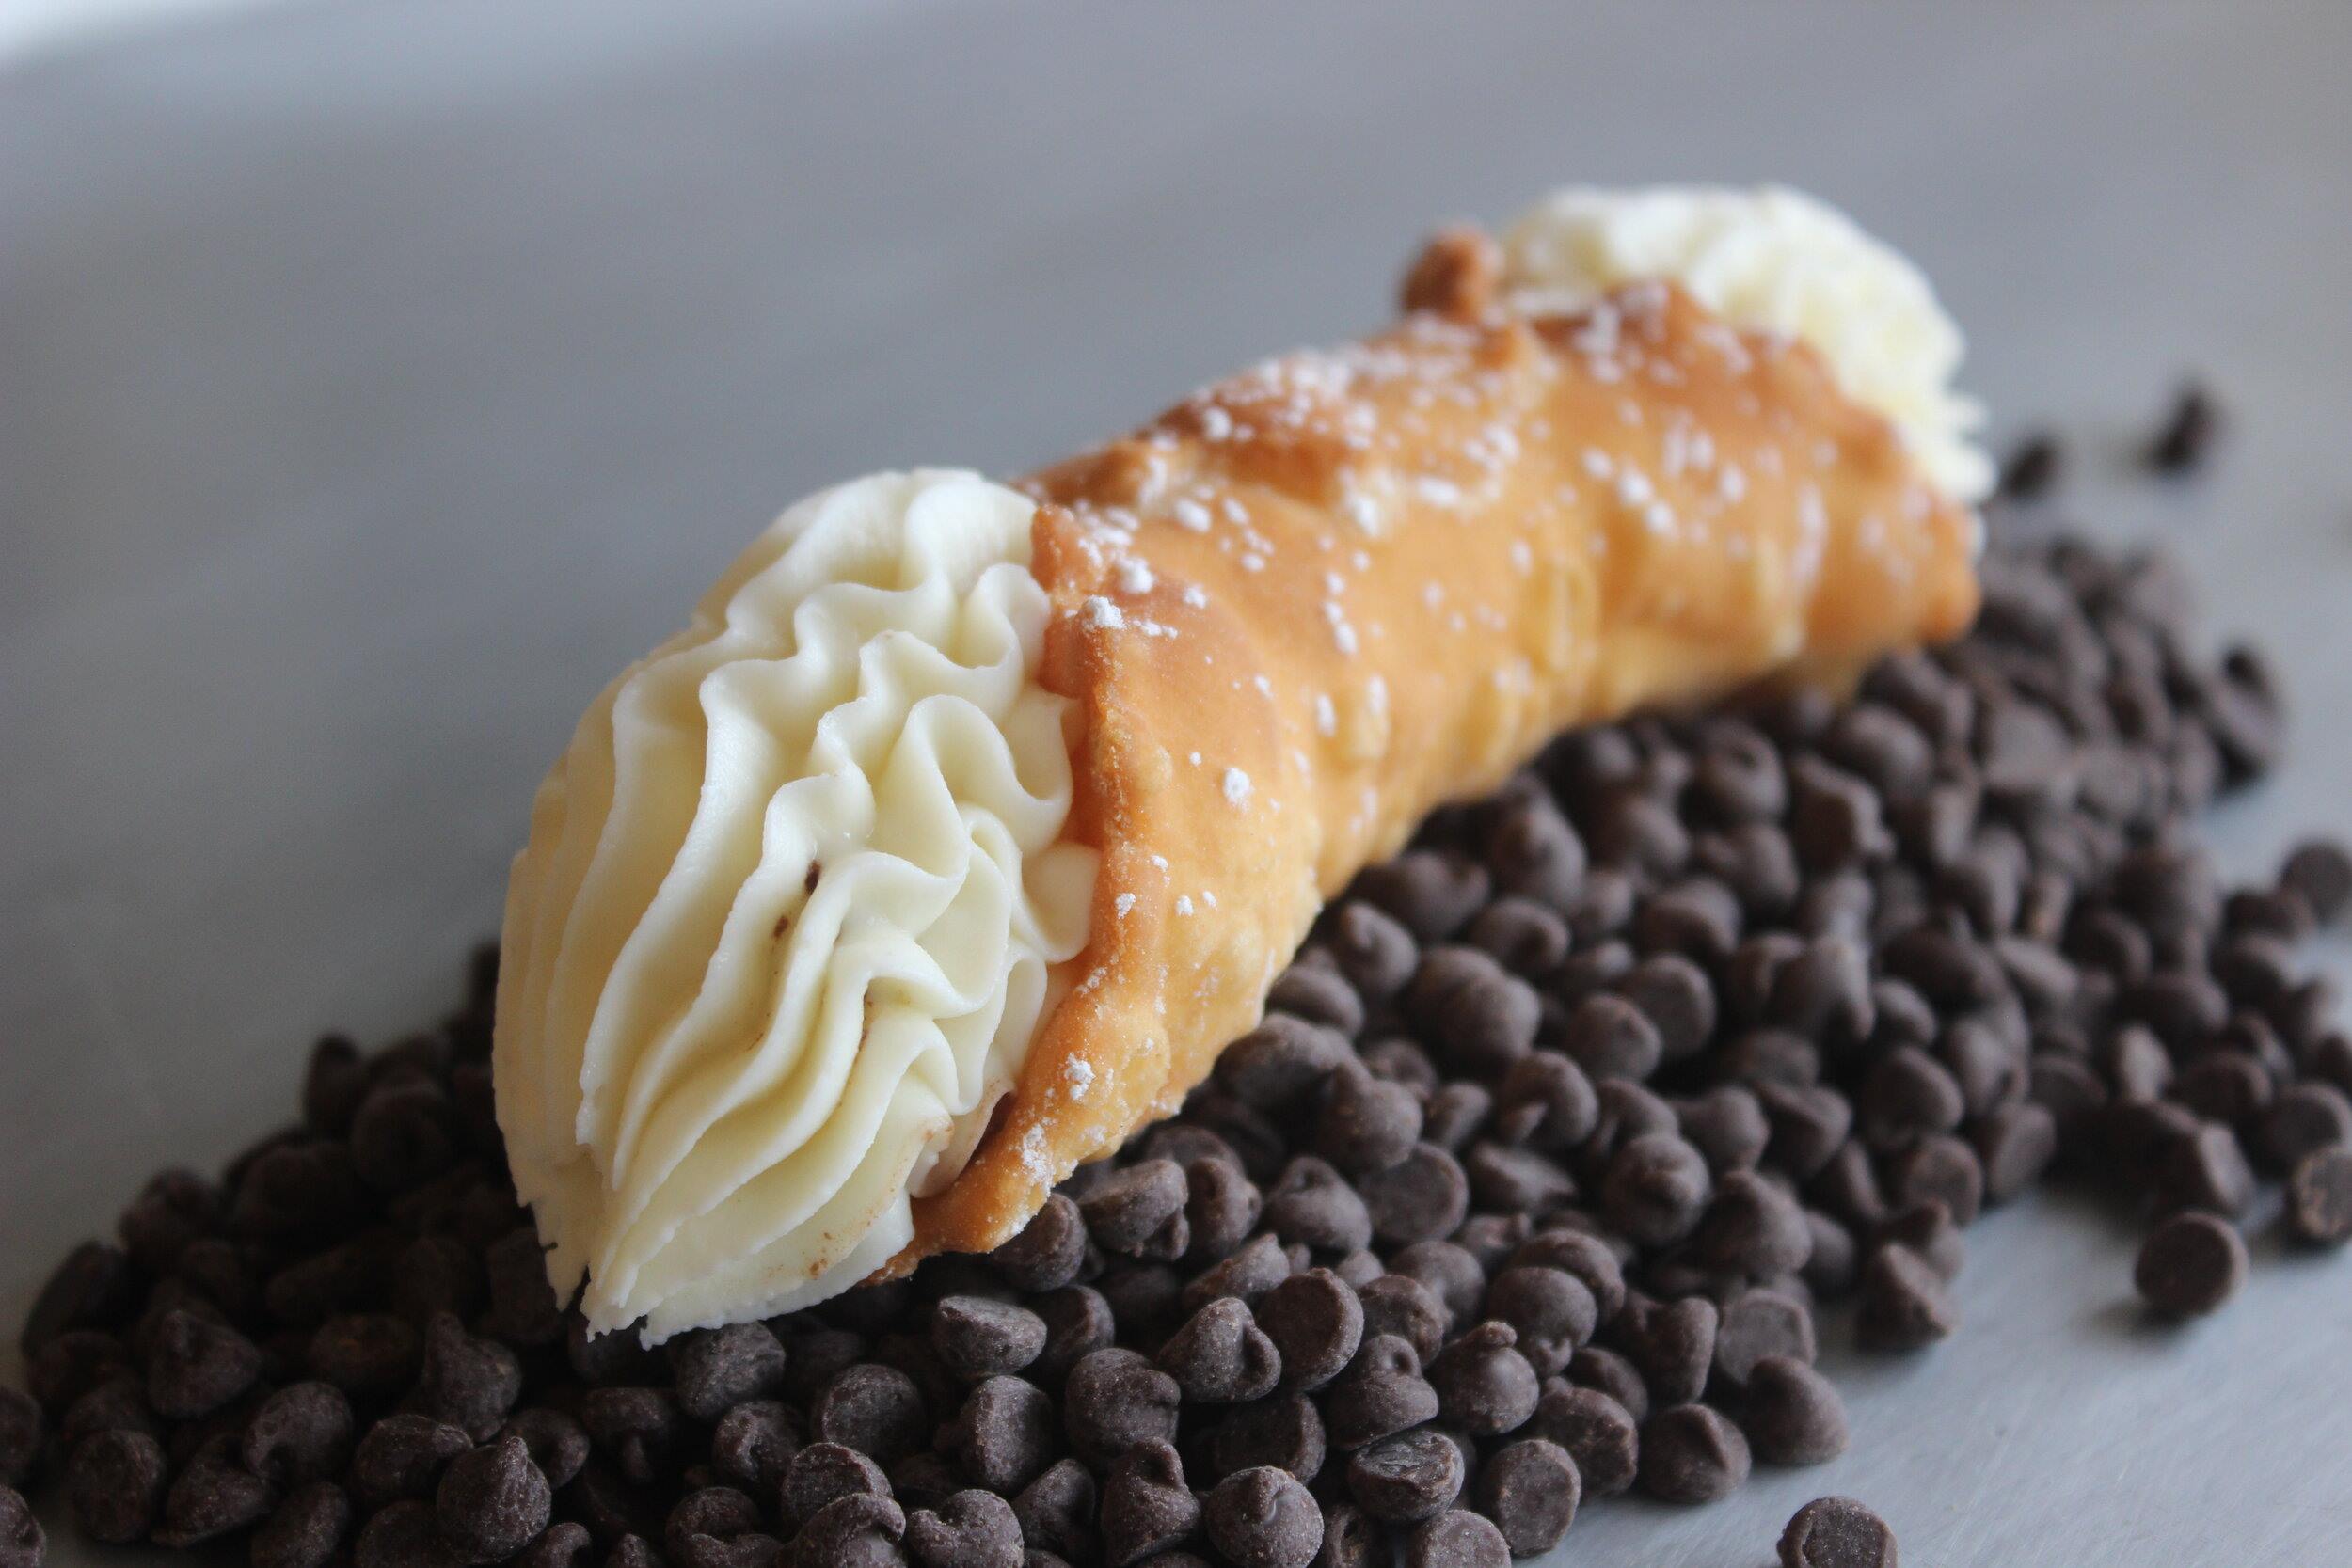 Discover The Irresistible Delight Of Florentine Cannoli